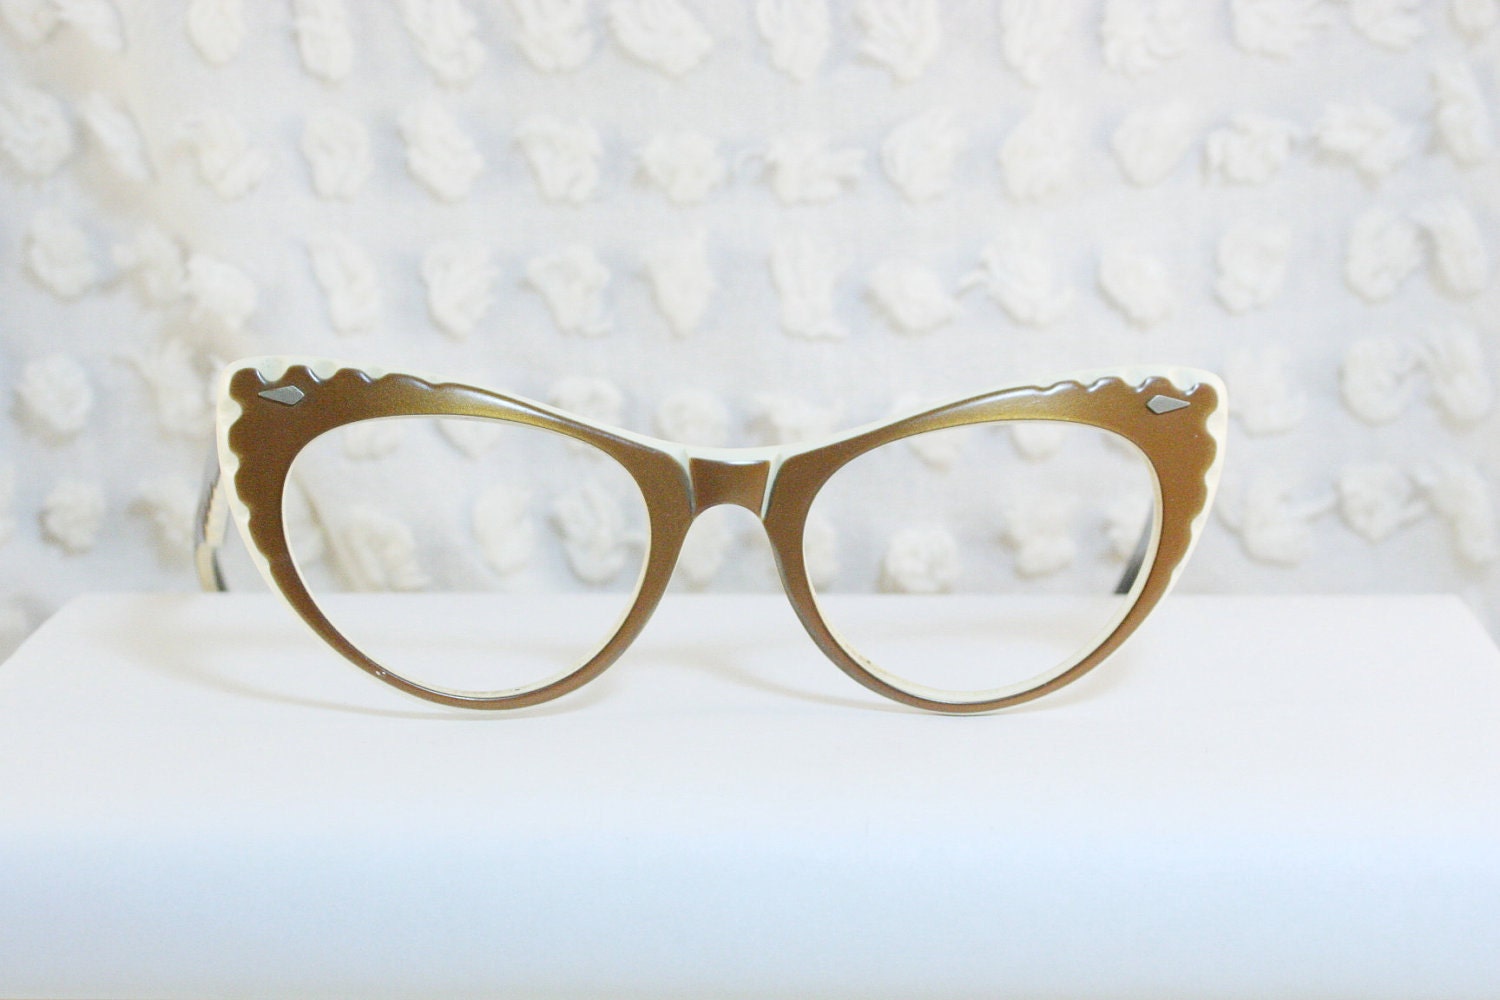 Bronze Wave 1950's Cat Eye Angular Eyeglasses with Carved Waves by Caloban